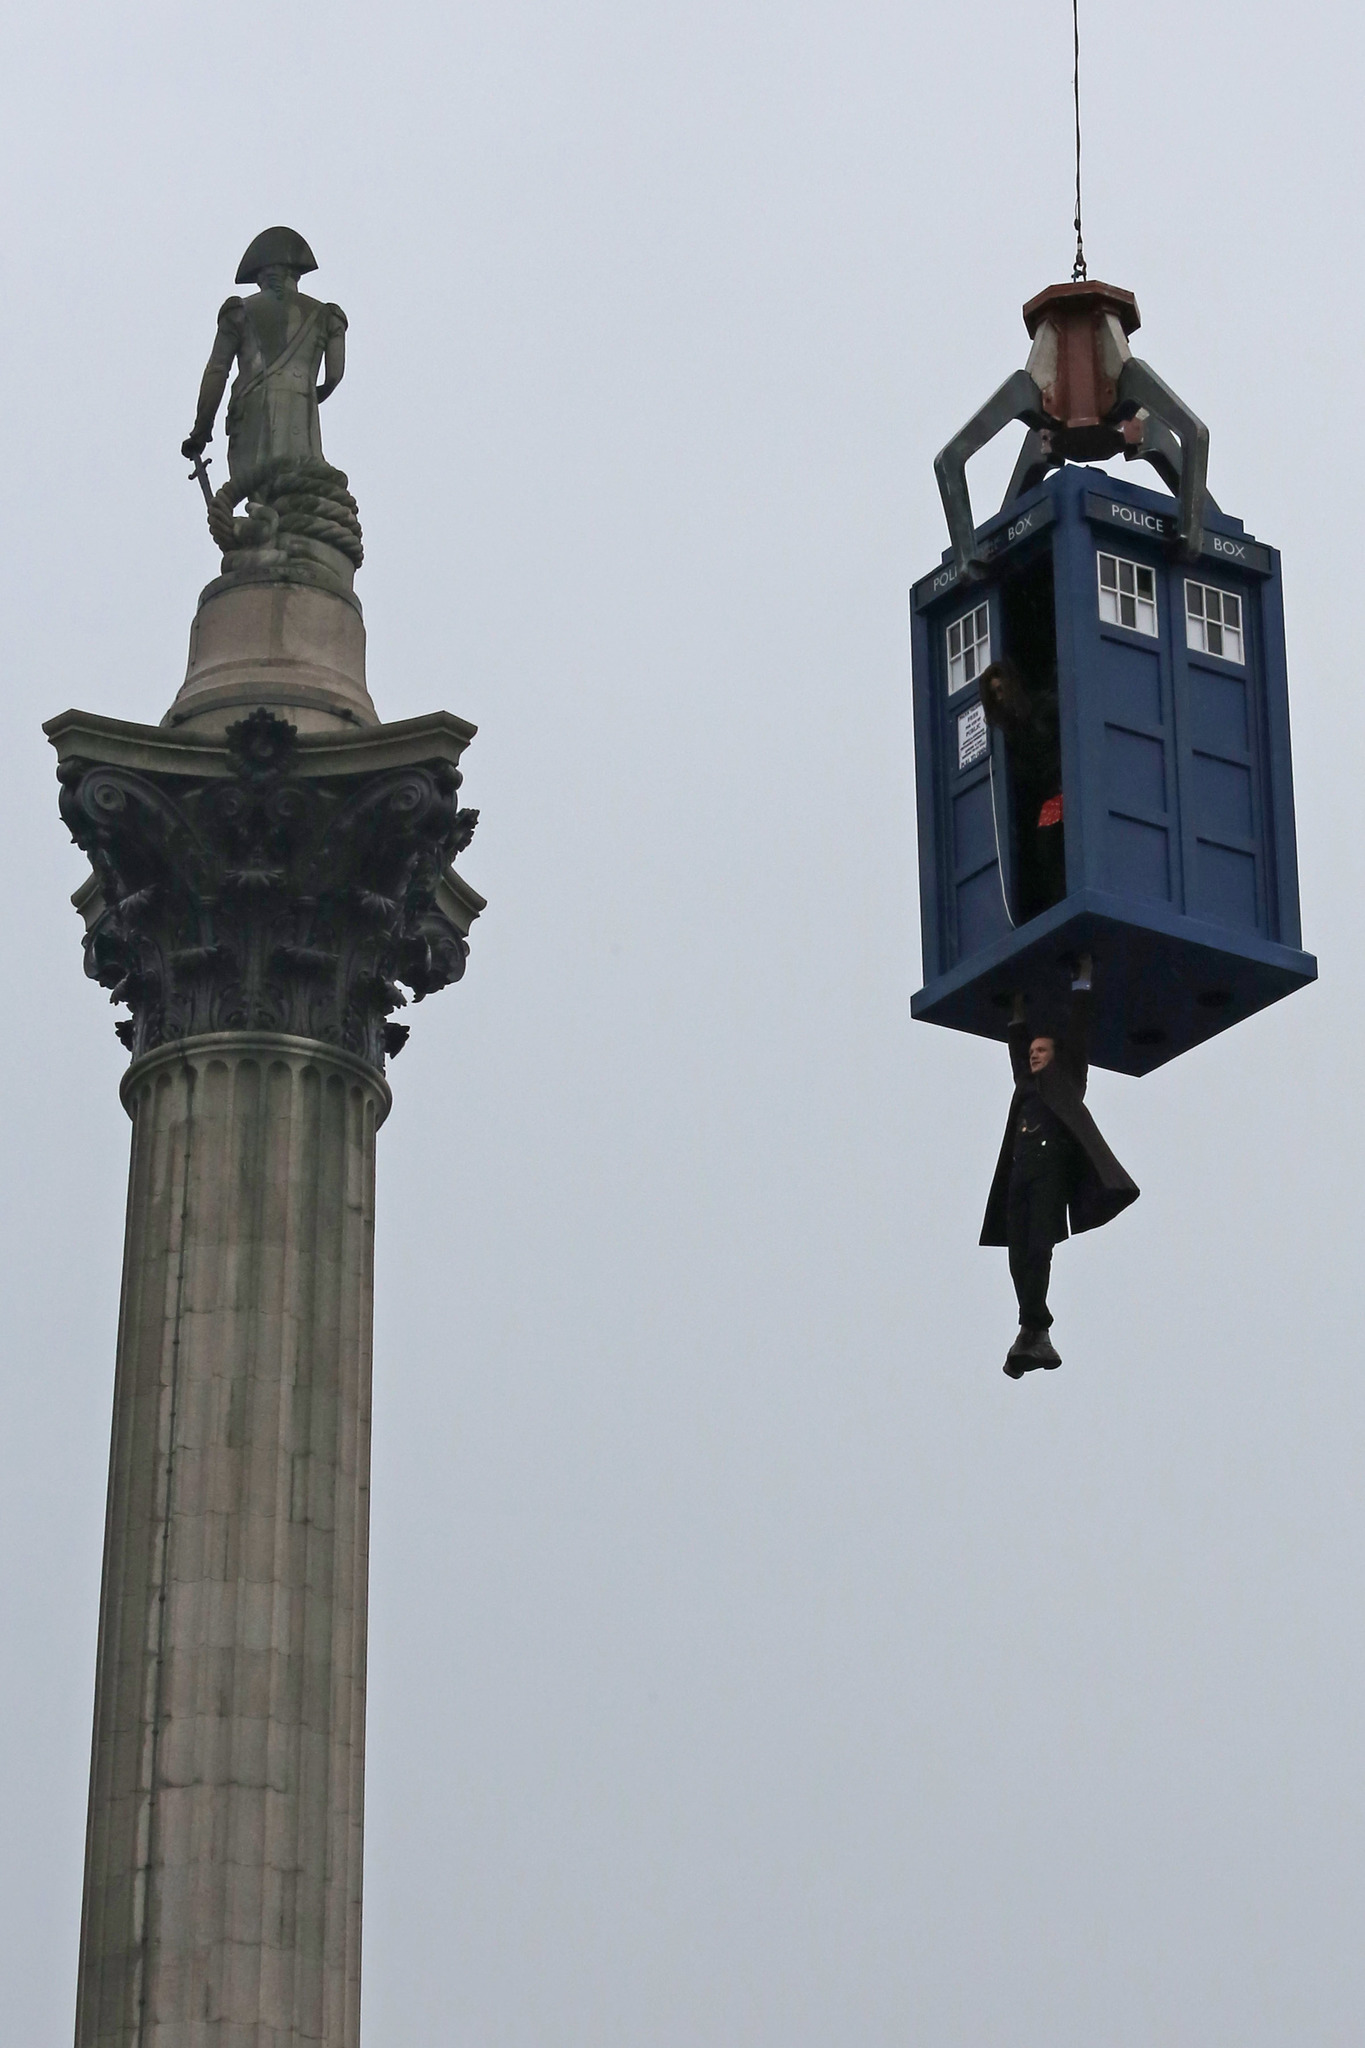 Matt Smith hangs from a suspended Tardis during filming of Dr Who, in Trafalgar Square on April 9, 2013 in London, England.